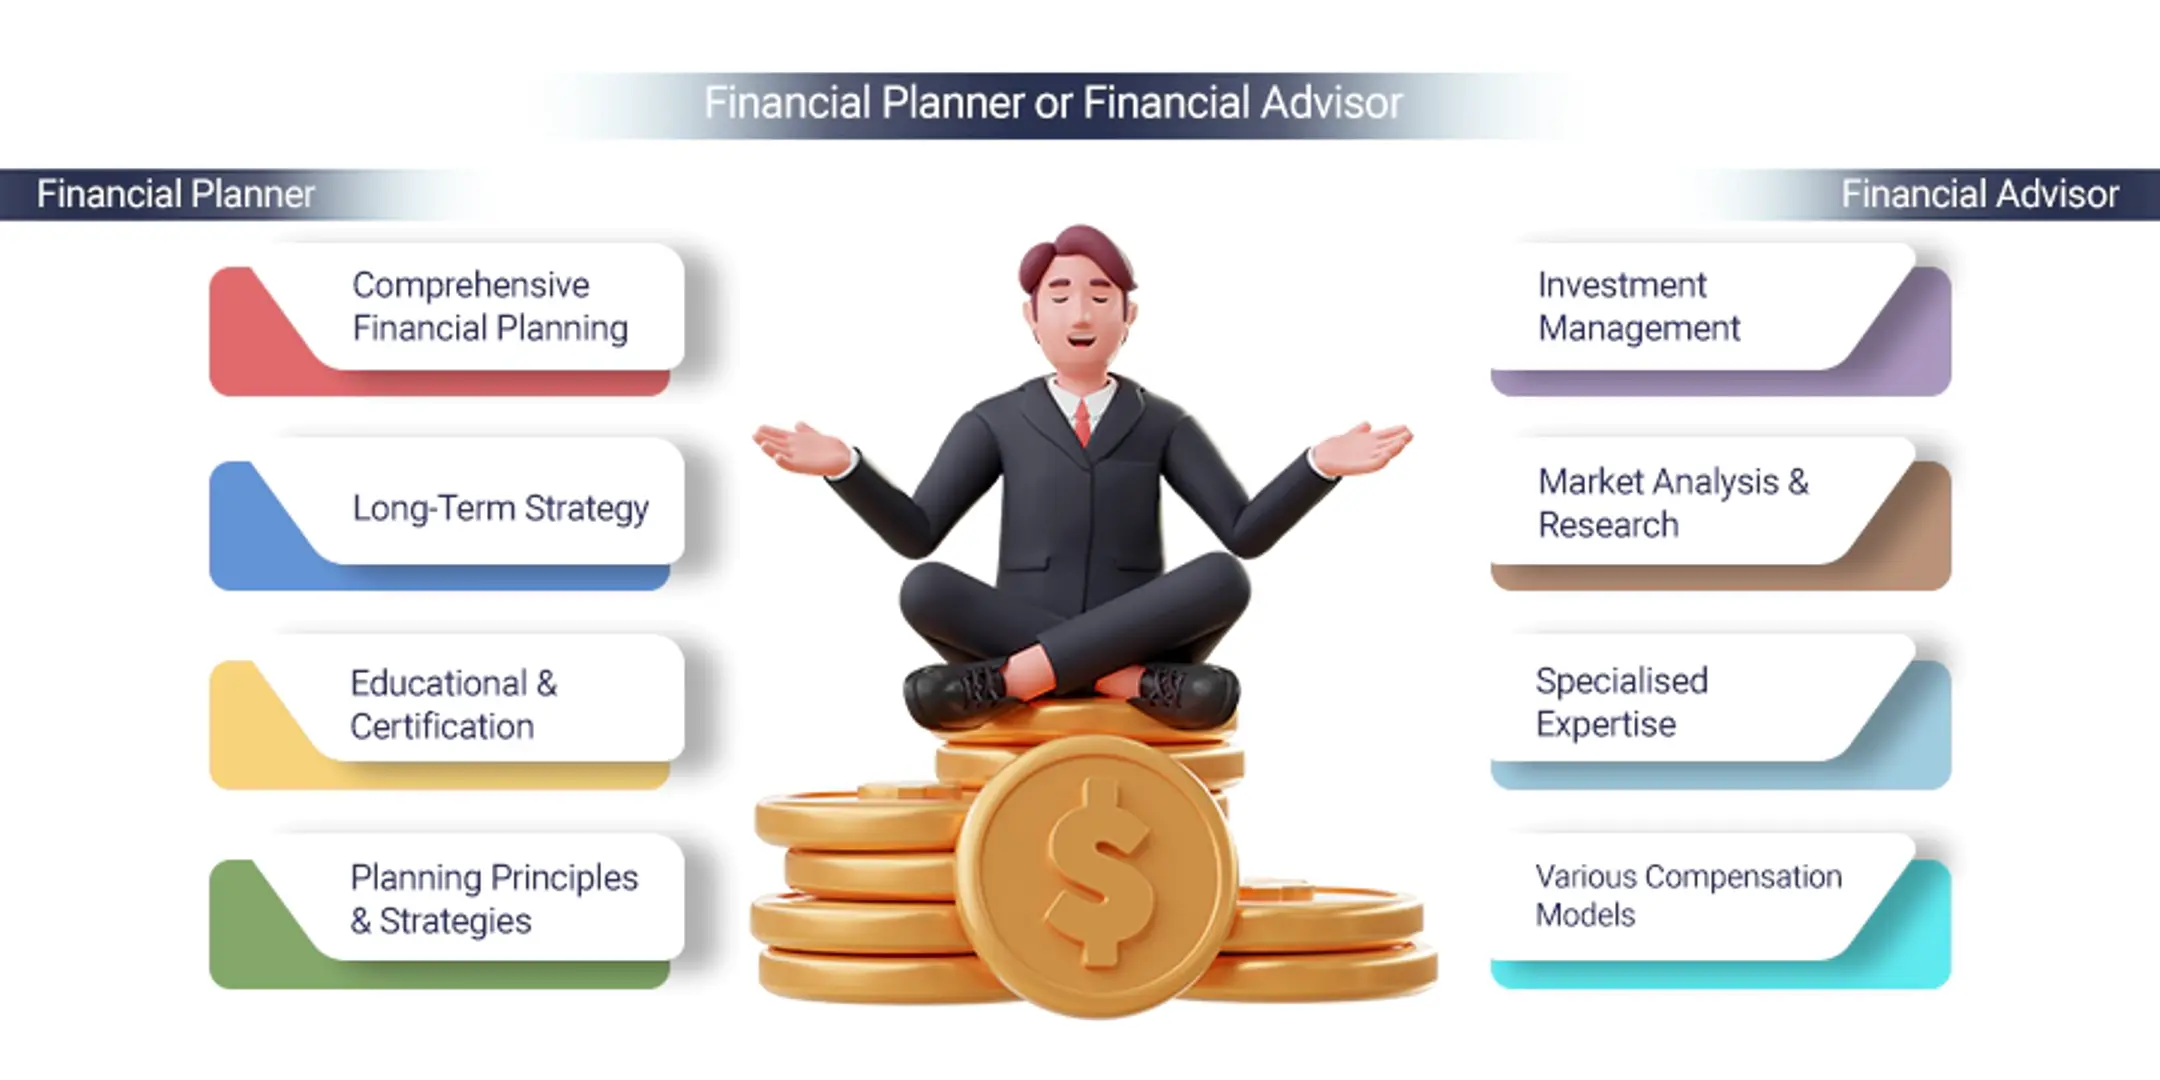 Difference between Financial Planner and Financial Advisor